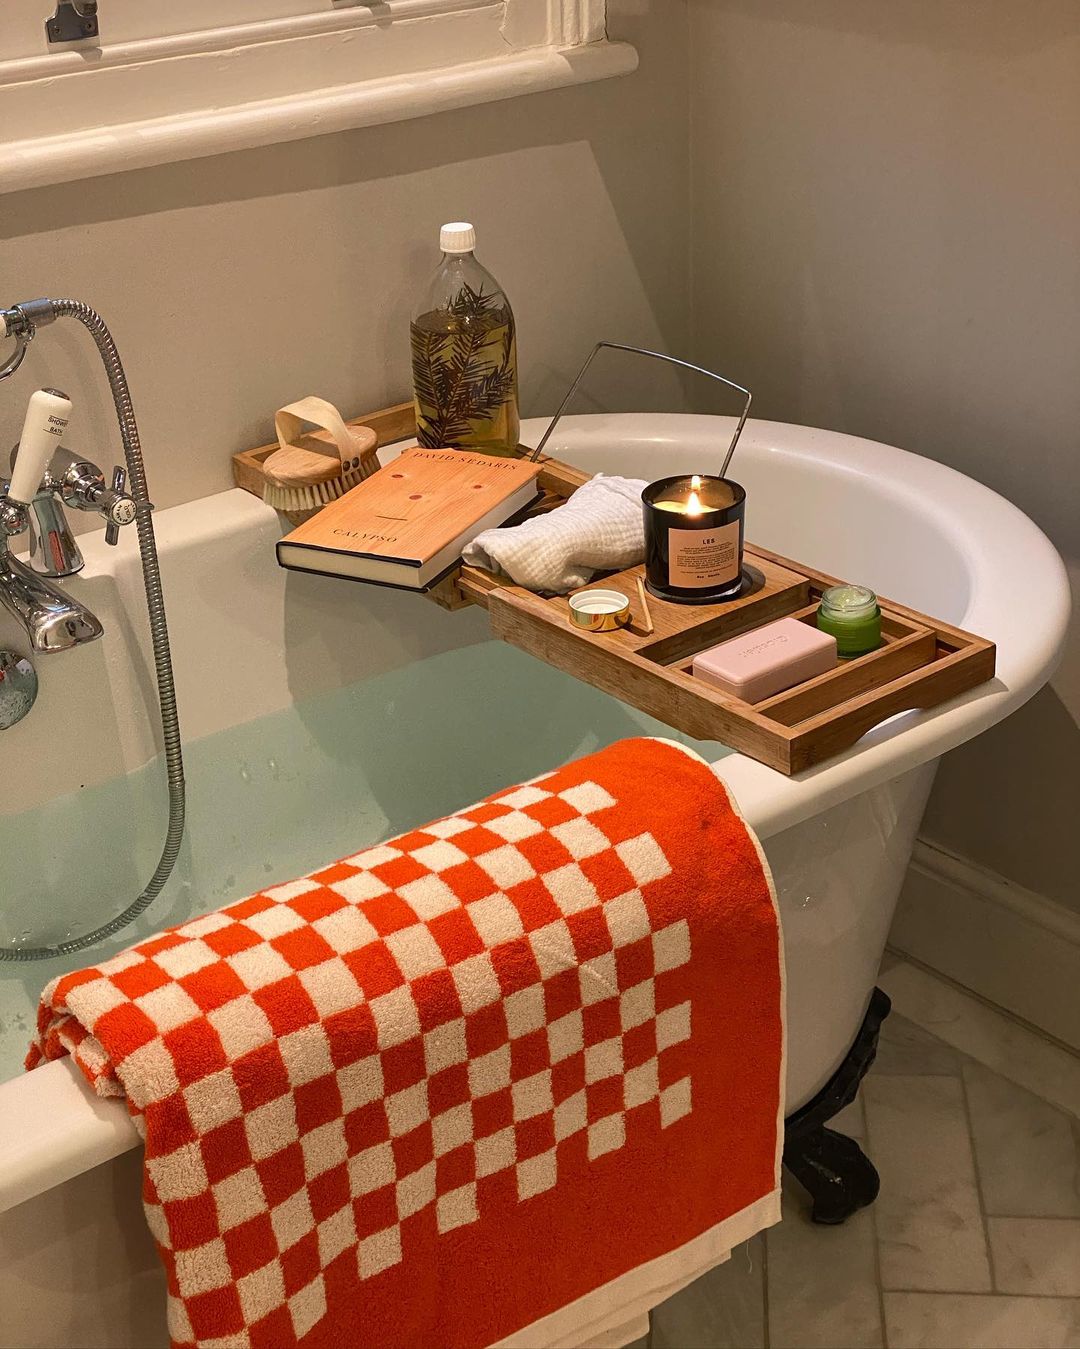 Bathscaping Is an Art Form—Here Are 5 Ways to Master It